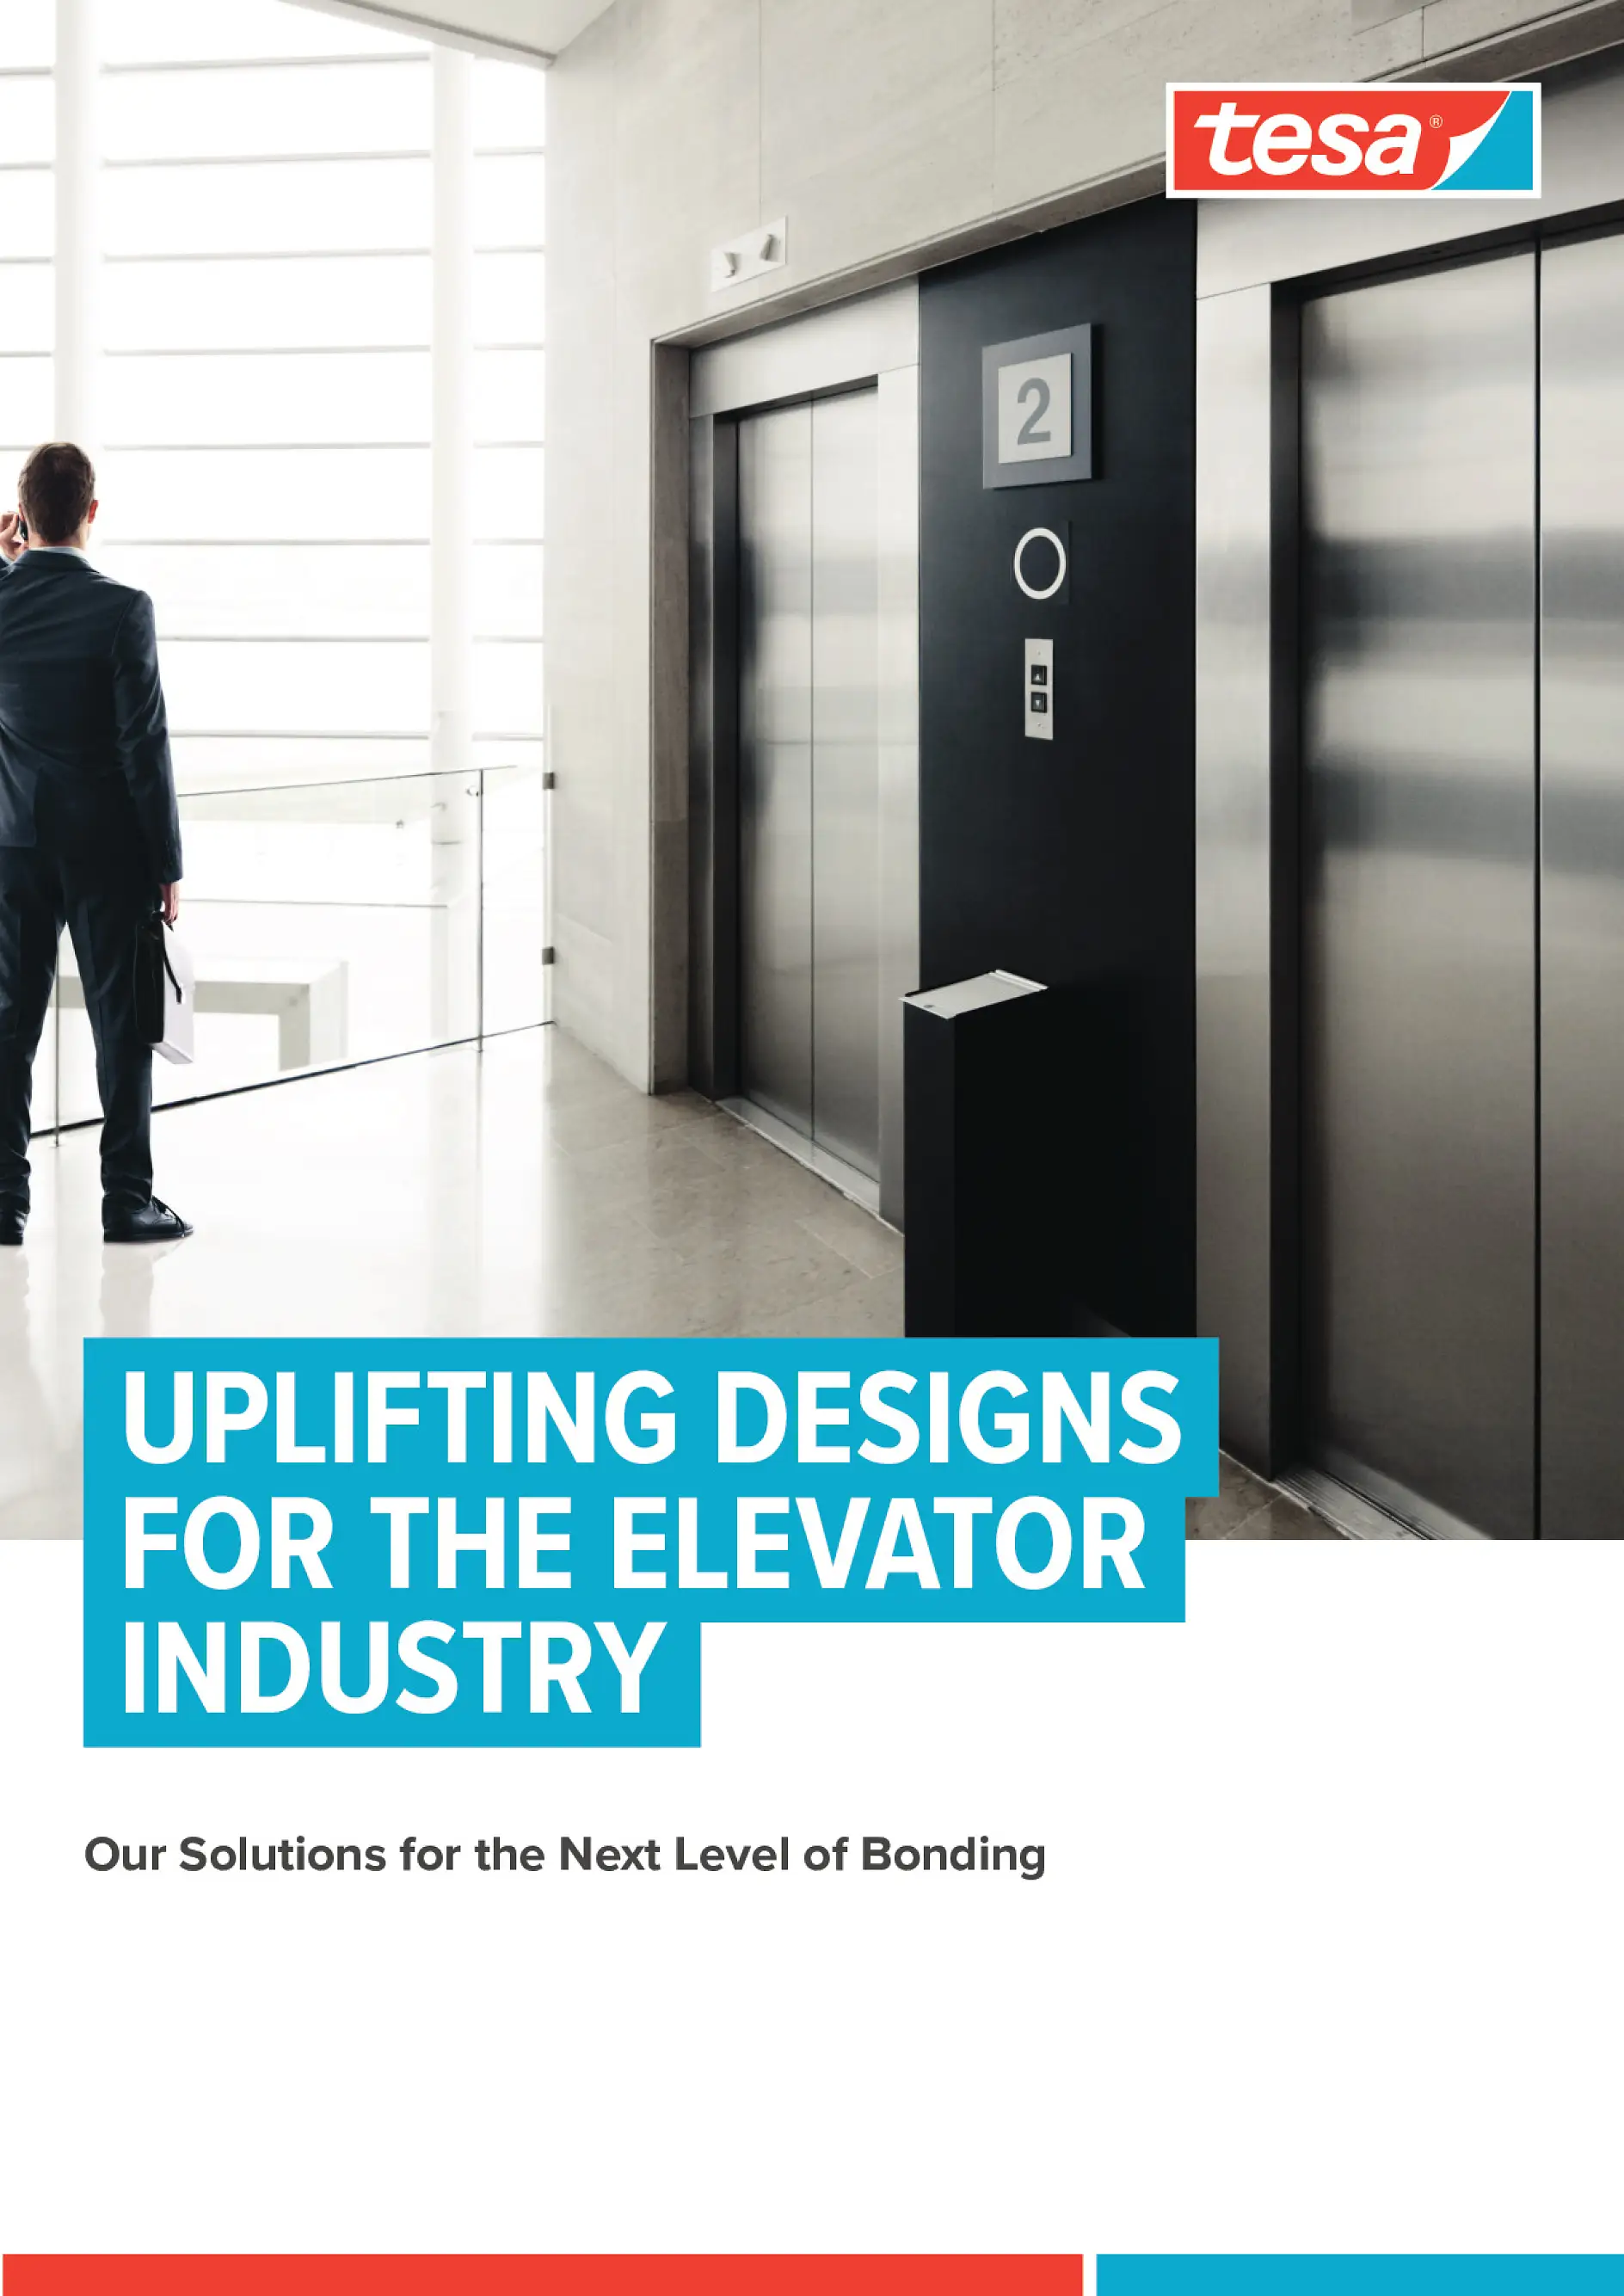 An overview of our solutions in the elevator market.